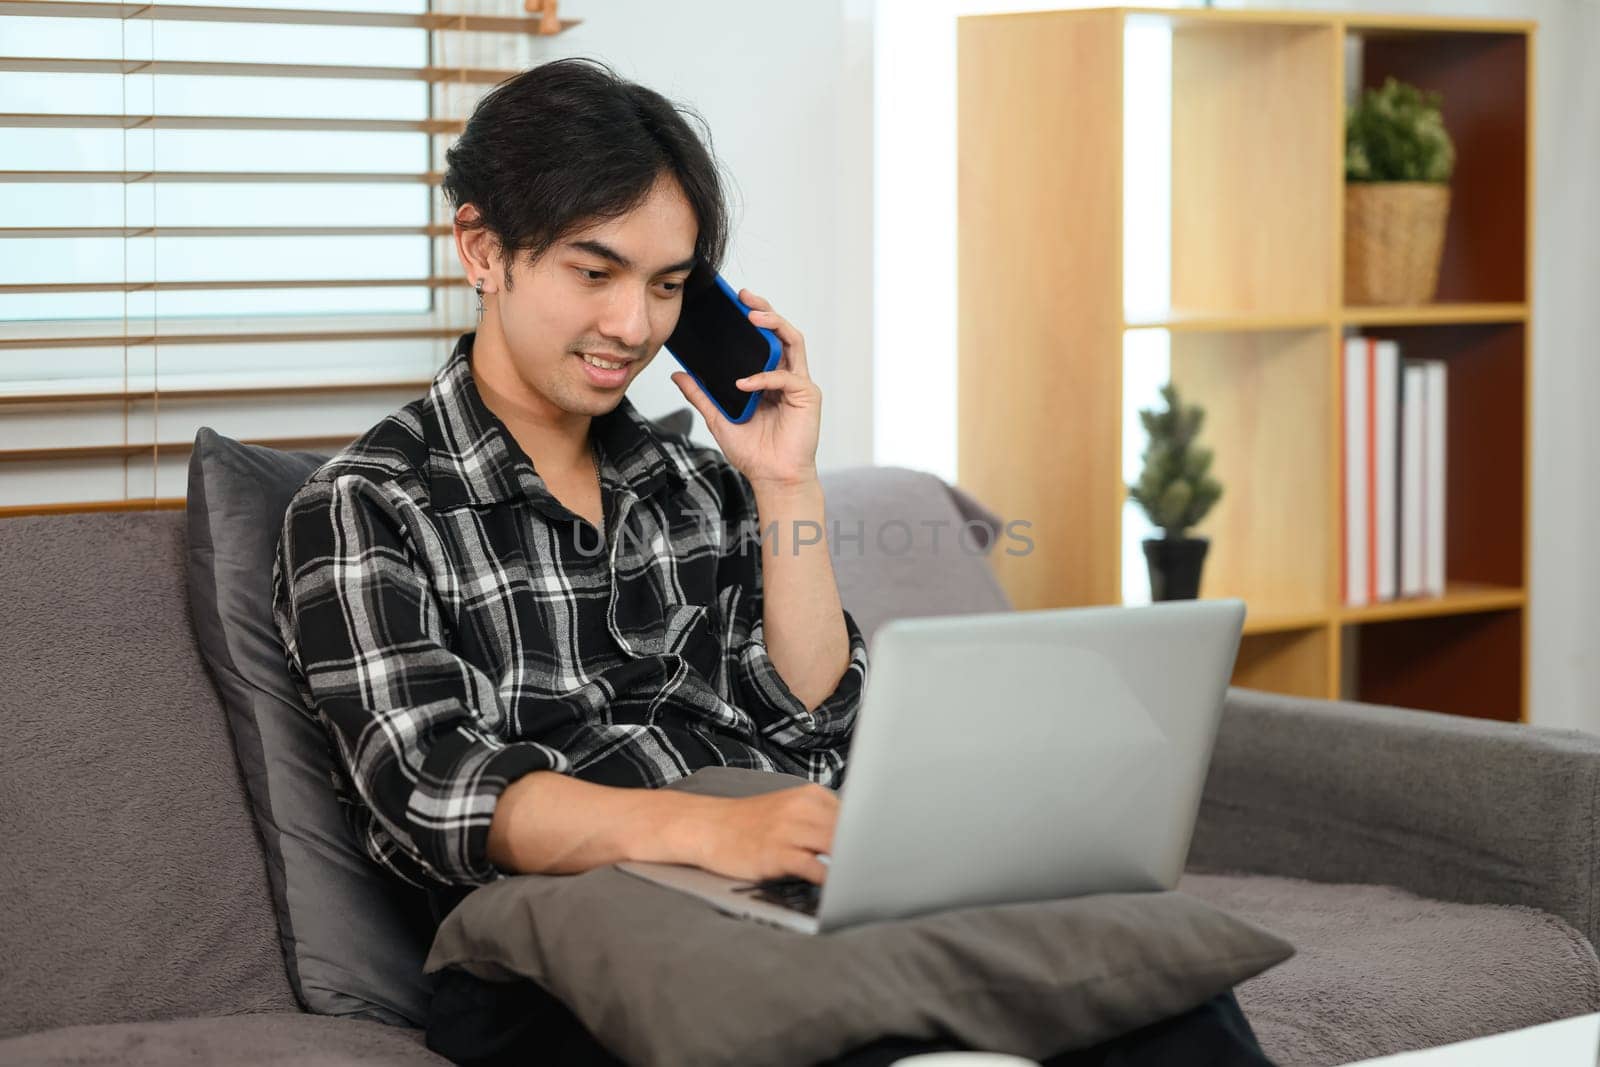 Smiling man working with laptop and talking on mobile phone sitting on couch at home.